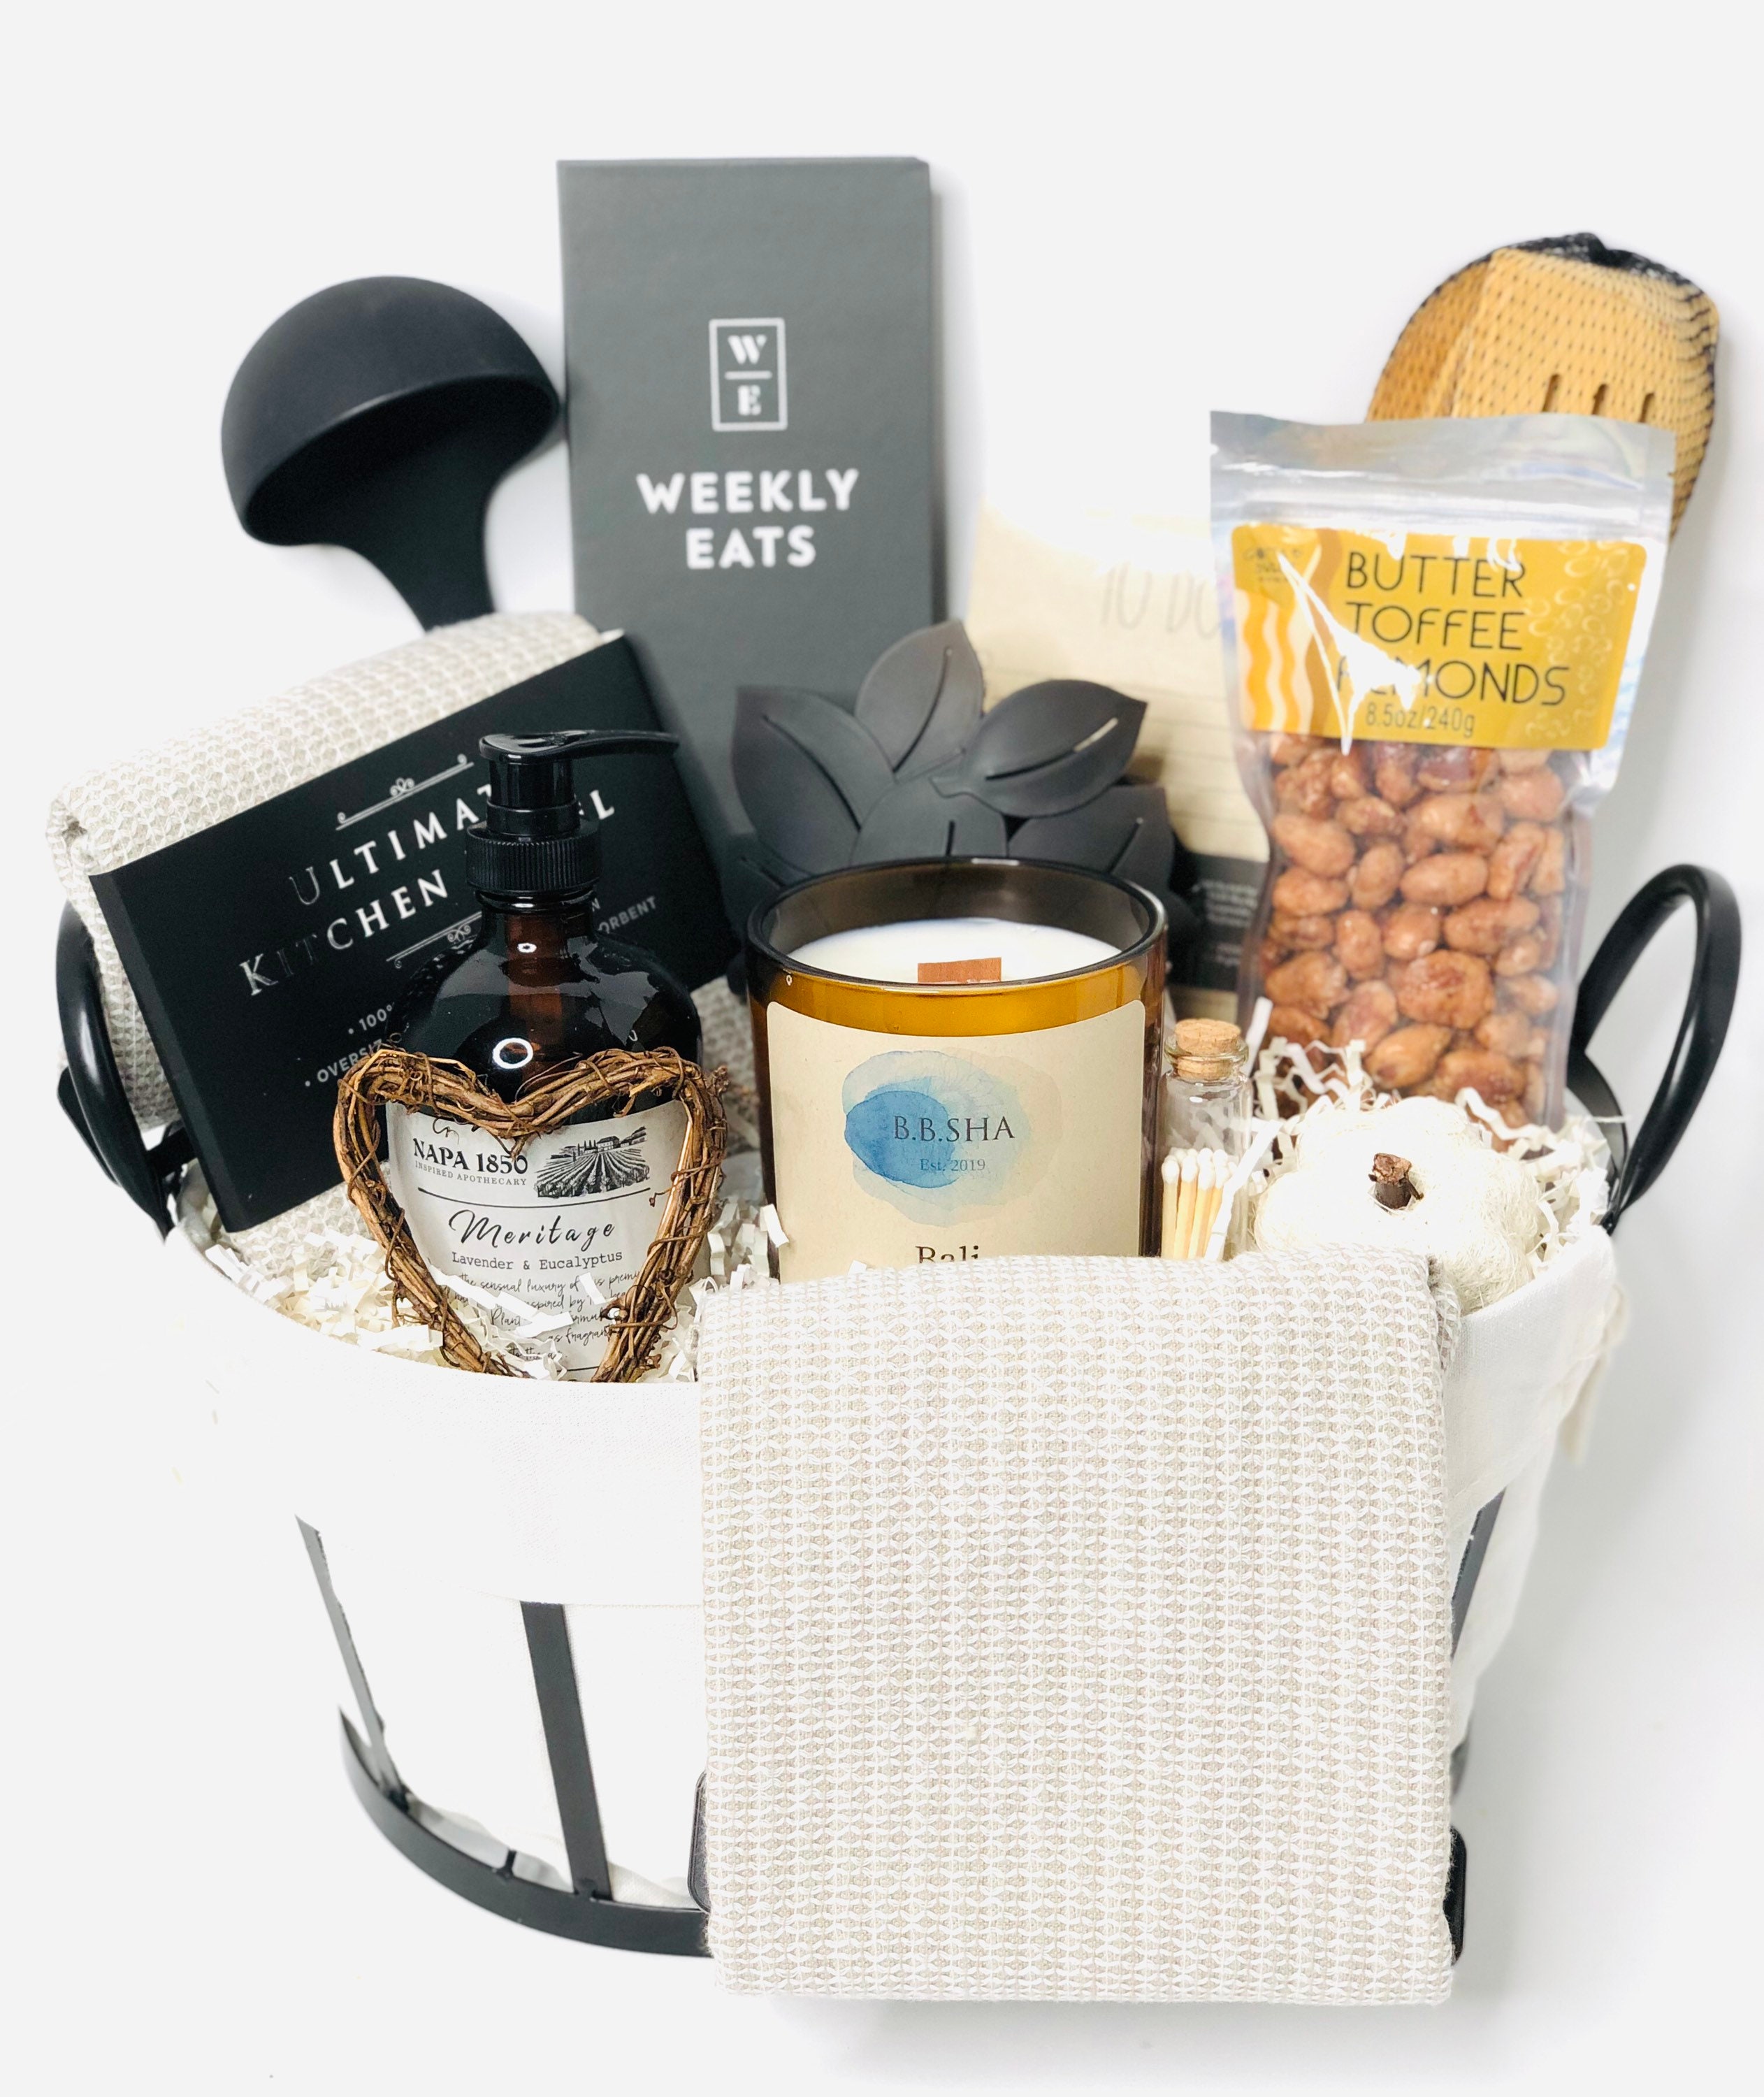  BECTA DESIGN Housewarming Gifts For New Home, Gift Basket  Ideas, Apartment Essentials for Couples, Gift Box Set for New House - Mug,  Corkscrew, Coasters, Keychains, Mastercloth, Tabletop Sign, Card: Home 